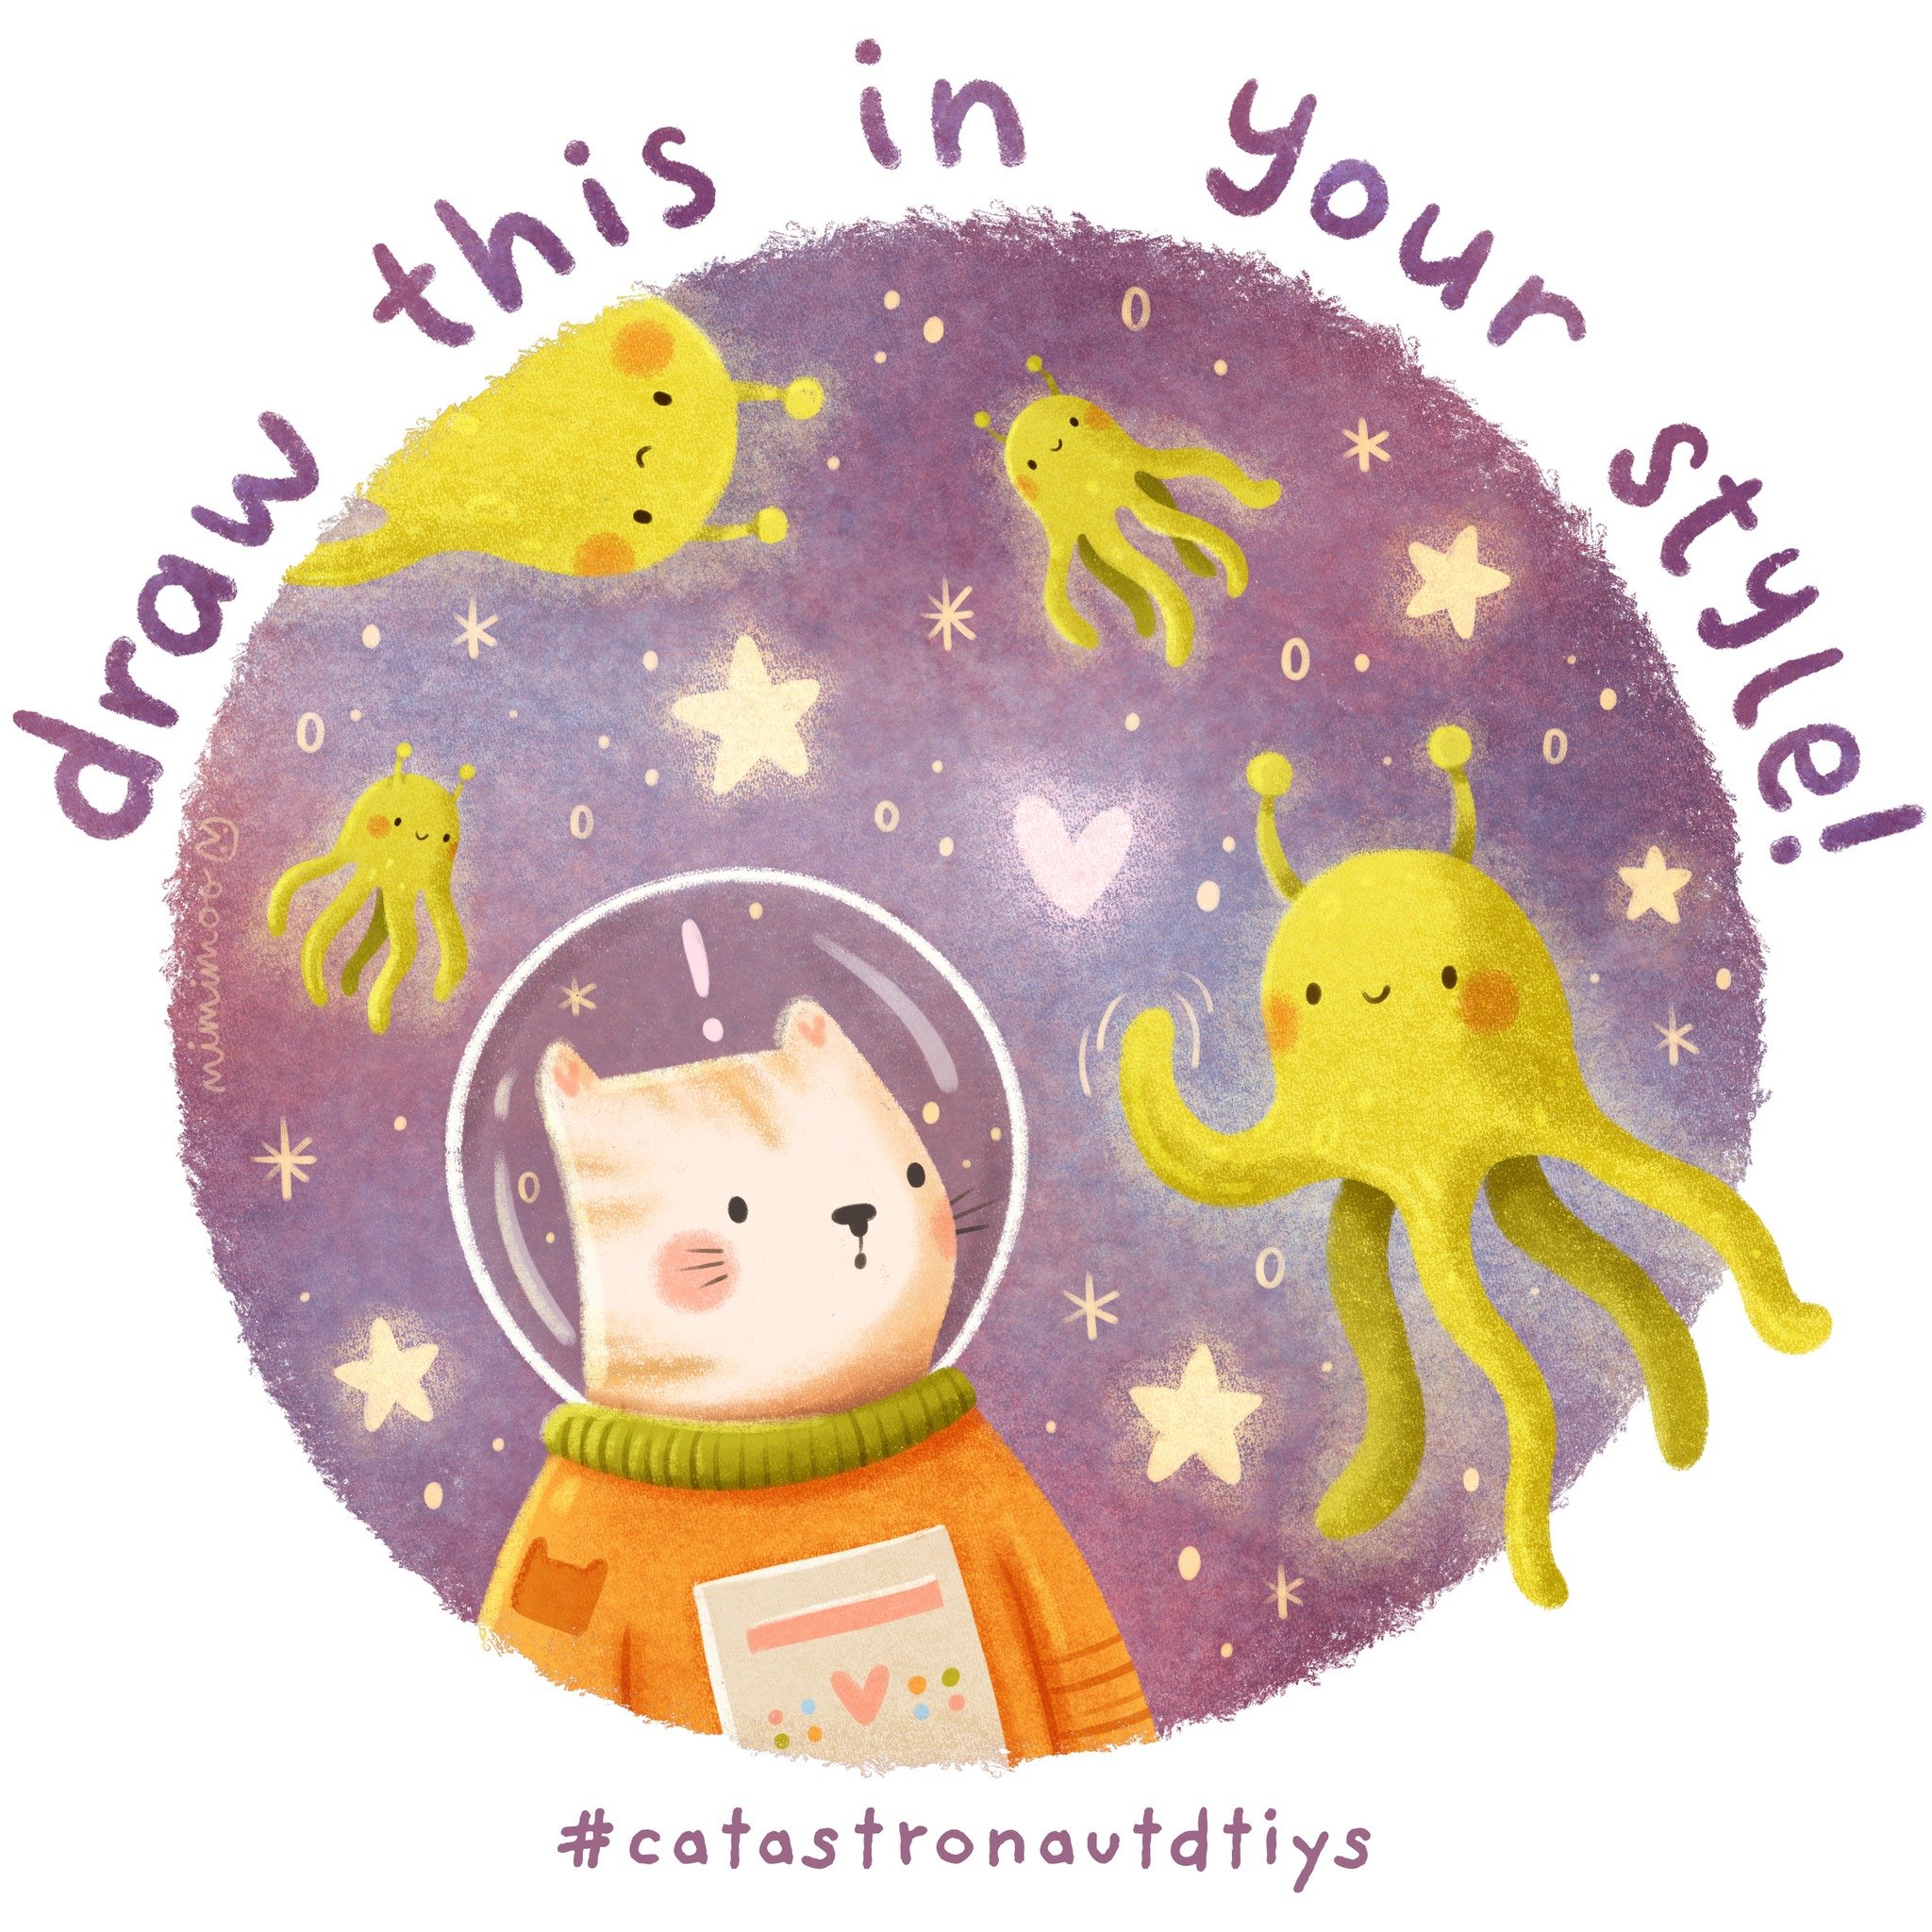 ✨ Draw this in your style! ✨

I wanted to mix things up with a space themed illustration and thought I'd invite you to join me! There's no special occasion, I just felt like doing something different 😊🚀👽

If you'd like to join this DTIYS challenge